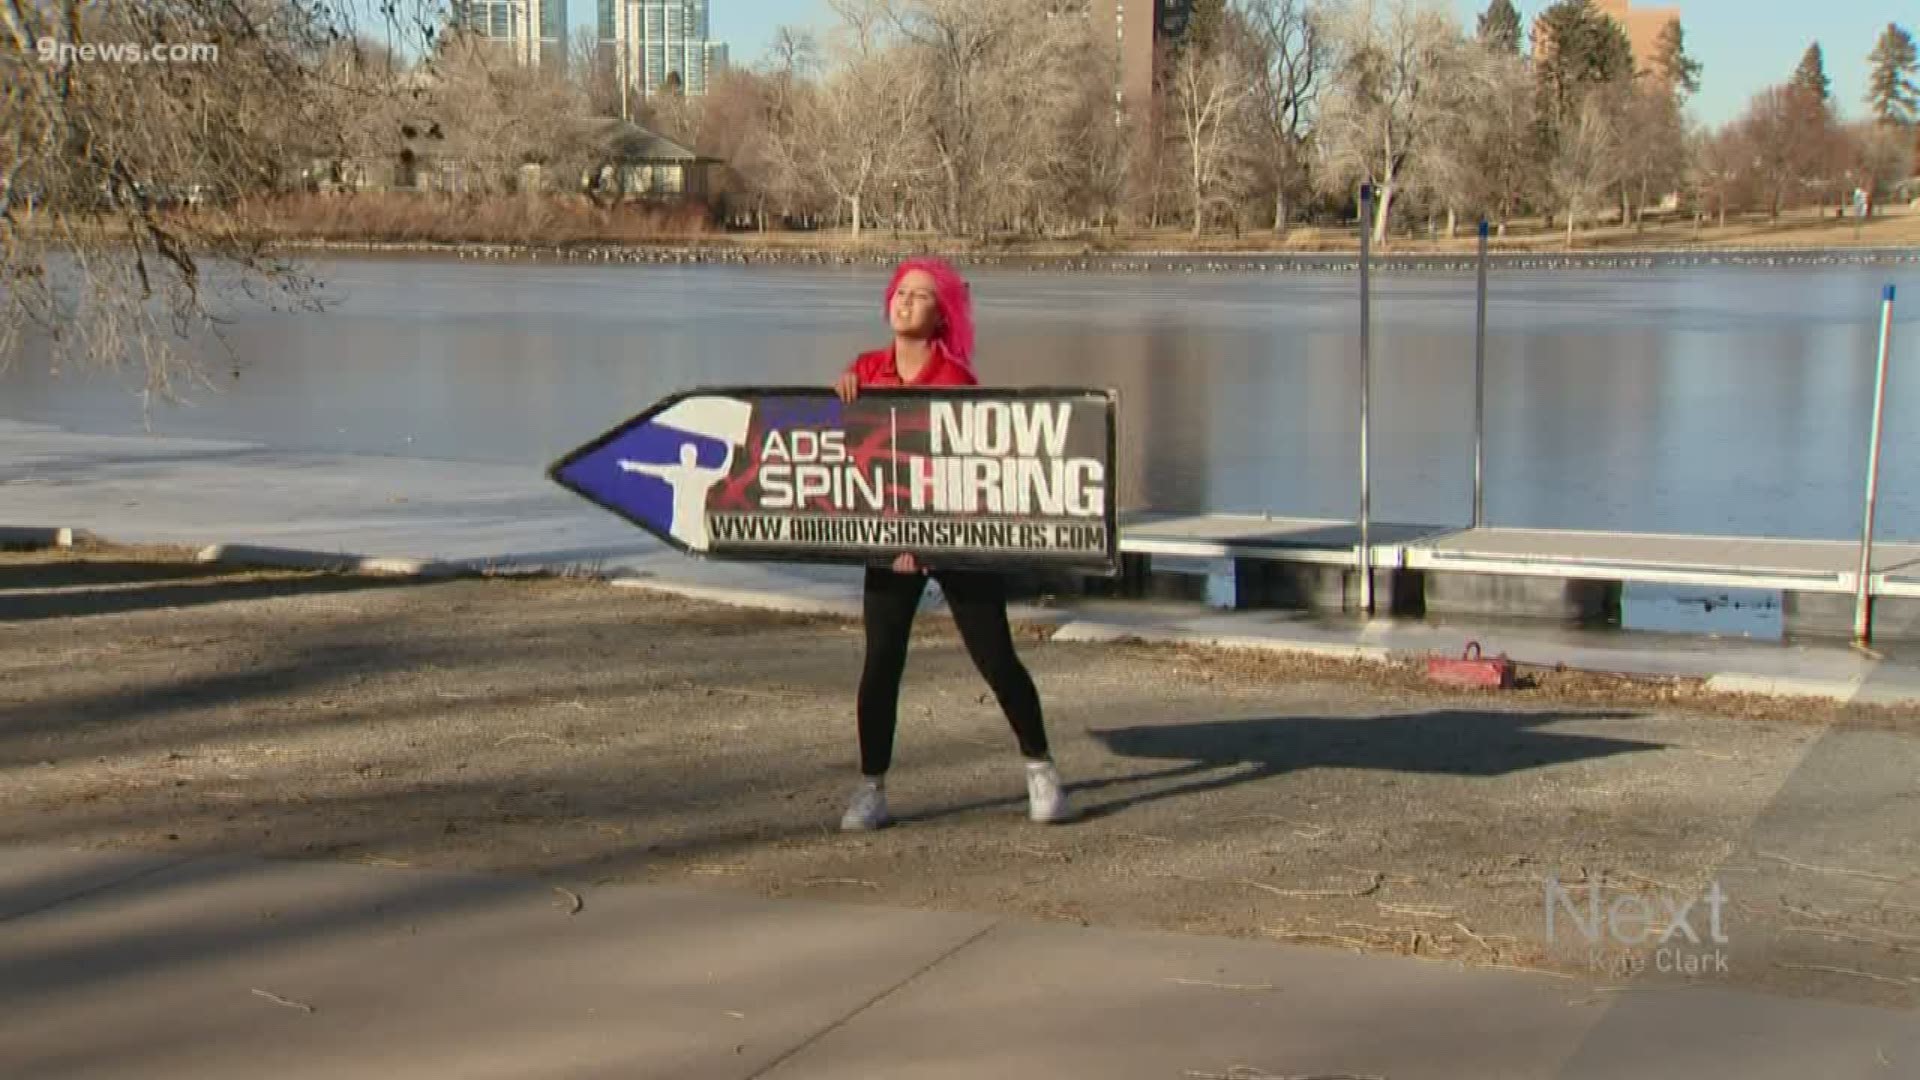 Two sign spinners from Denver will compete in the championships this weekend. We got a look at the solo sport through the lens of Photojournalist Corky Scholl.